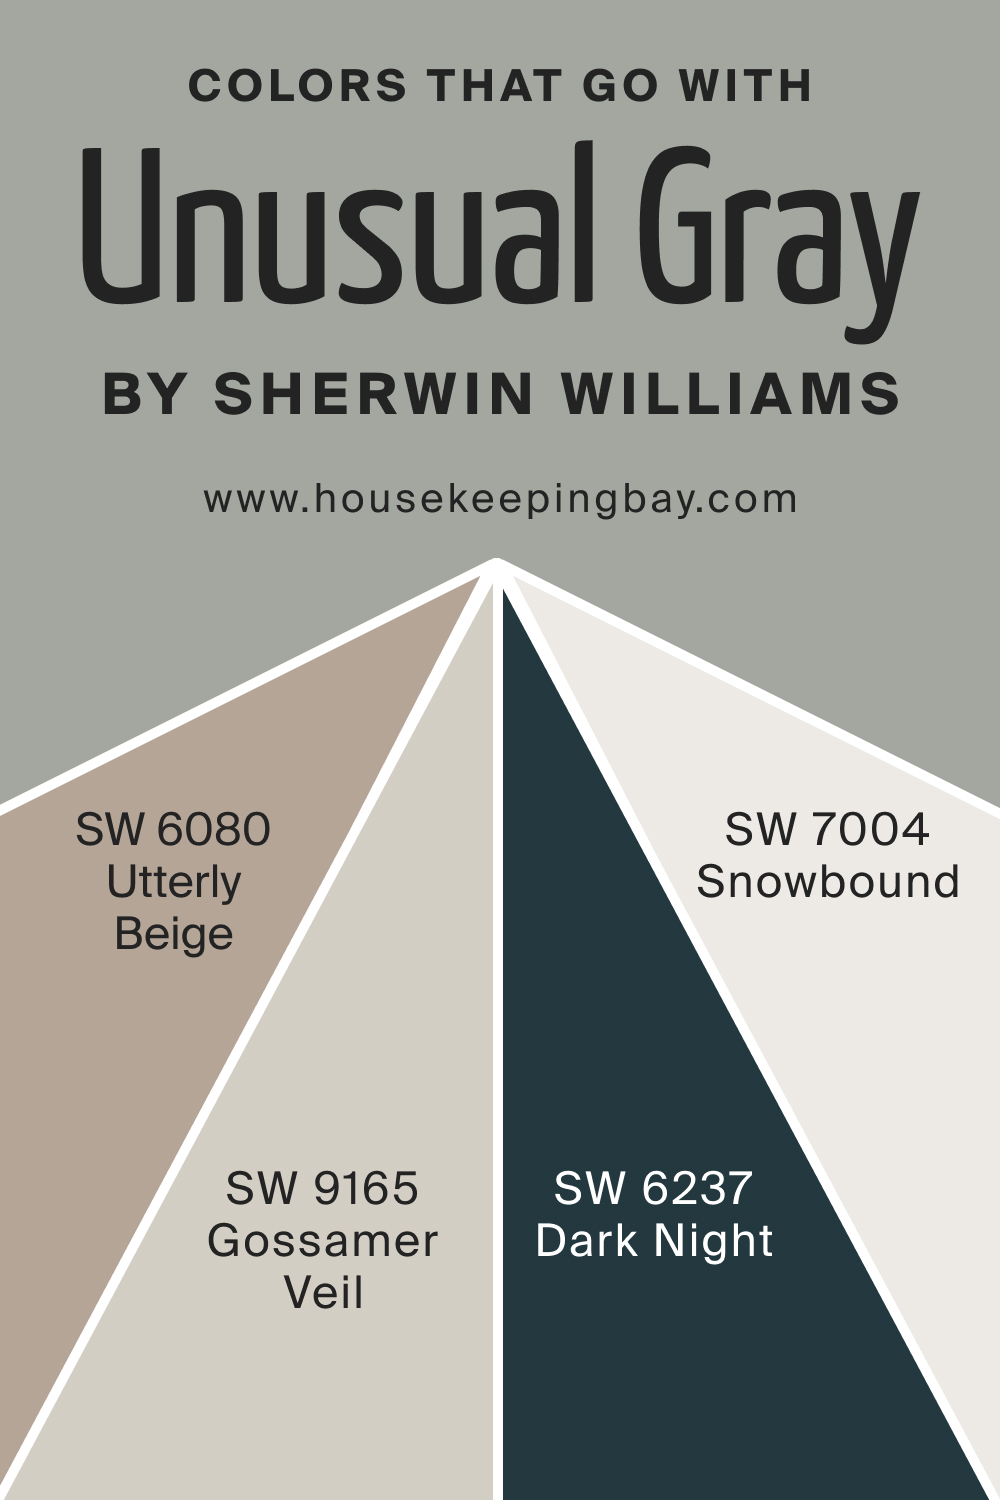 Colors that goes with SW 7059 Unusual Gray by Sherwin Williams